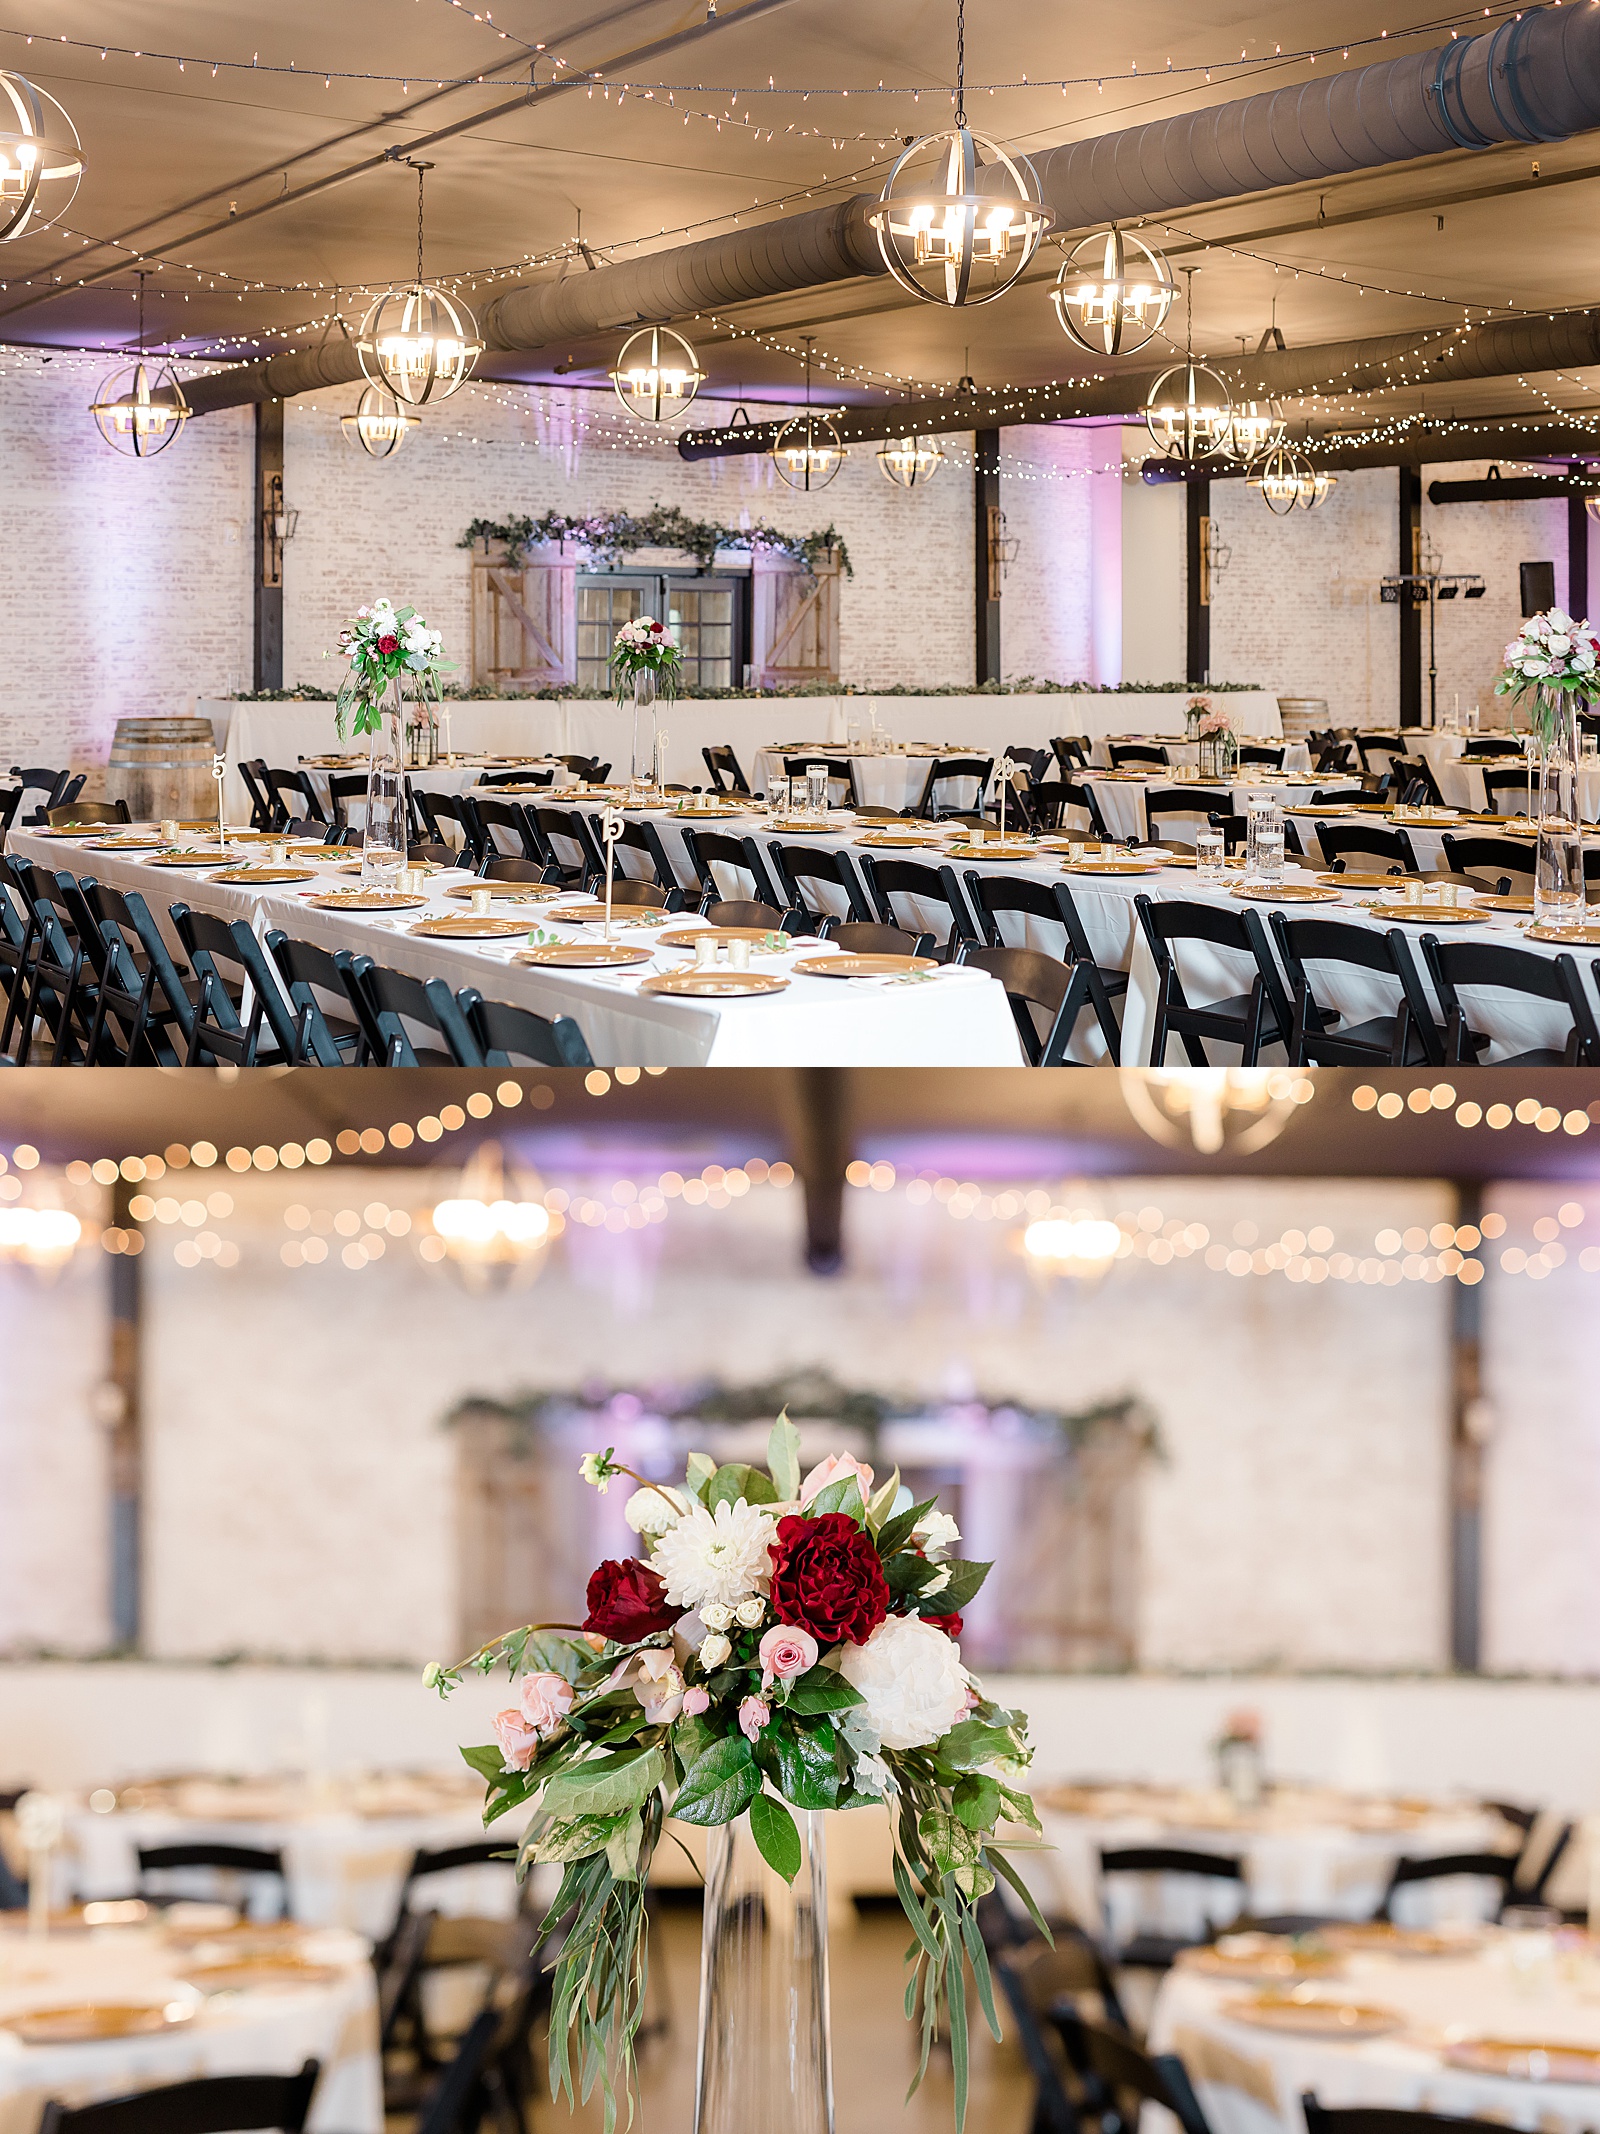 Reception details for rustic wedding at Bluebelle Events venue 